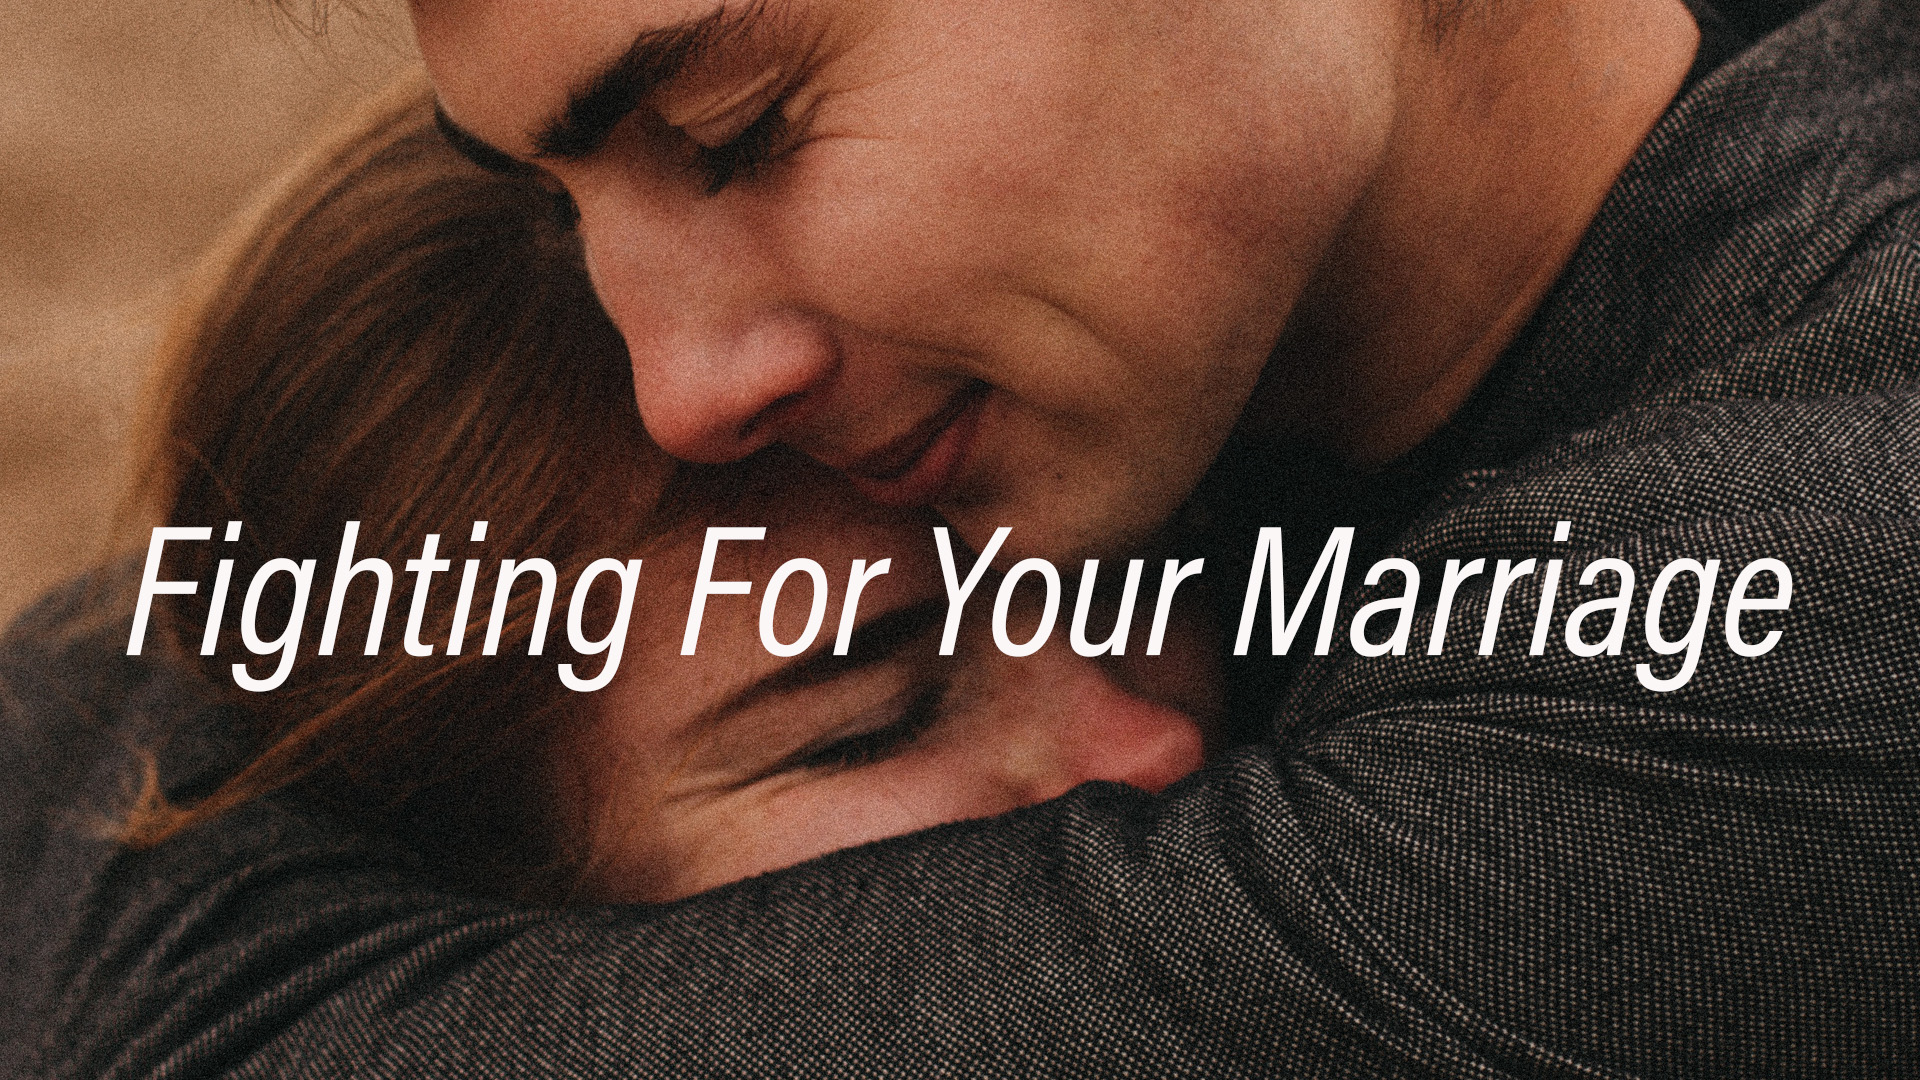 Fighting For Your Marriage | 102

6-Week Series
Thursdays | 6:30-8:30pm
March 16 - April 20
